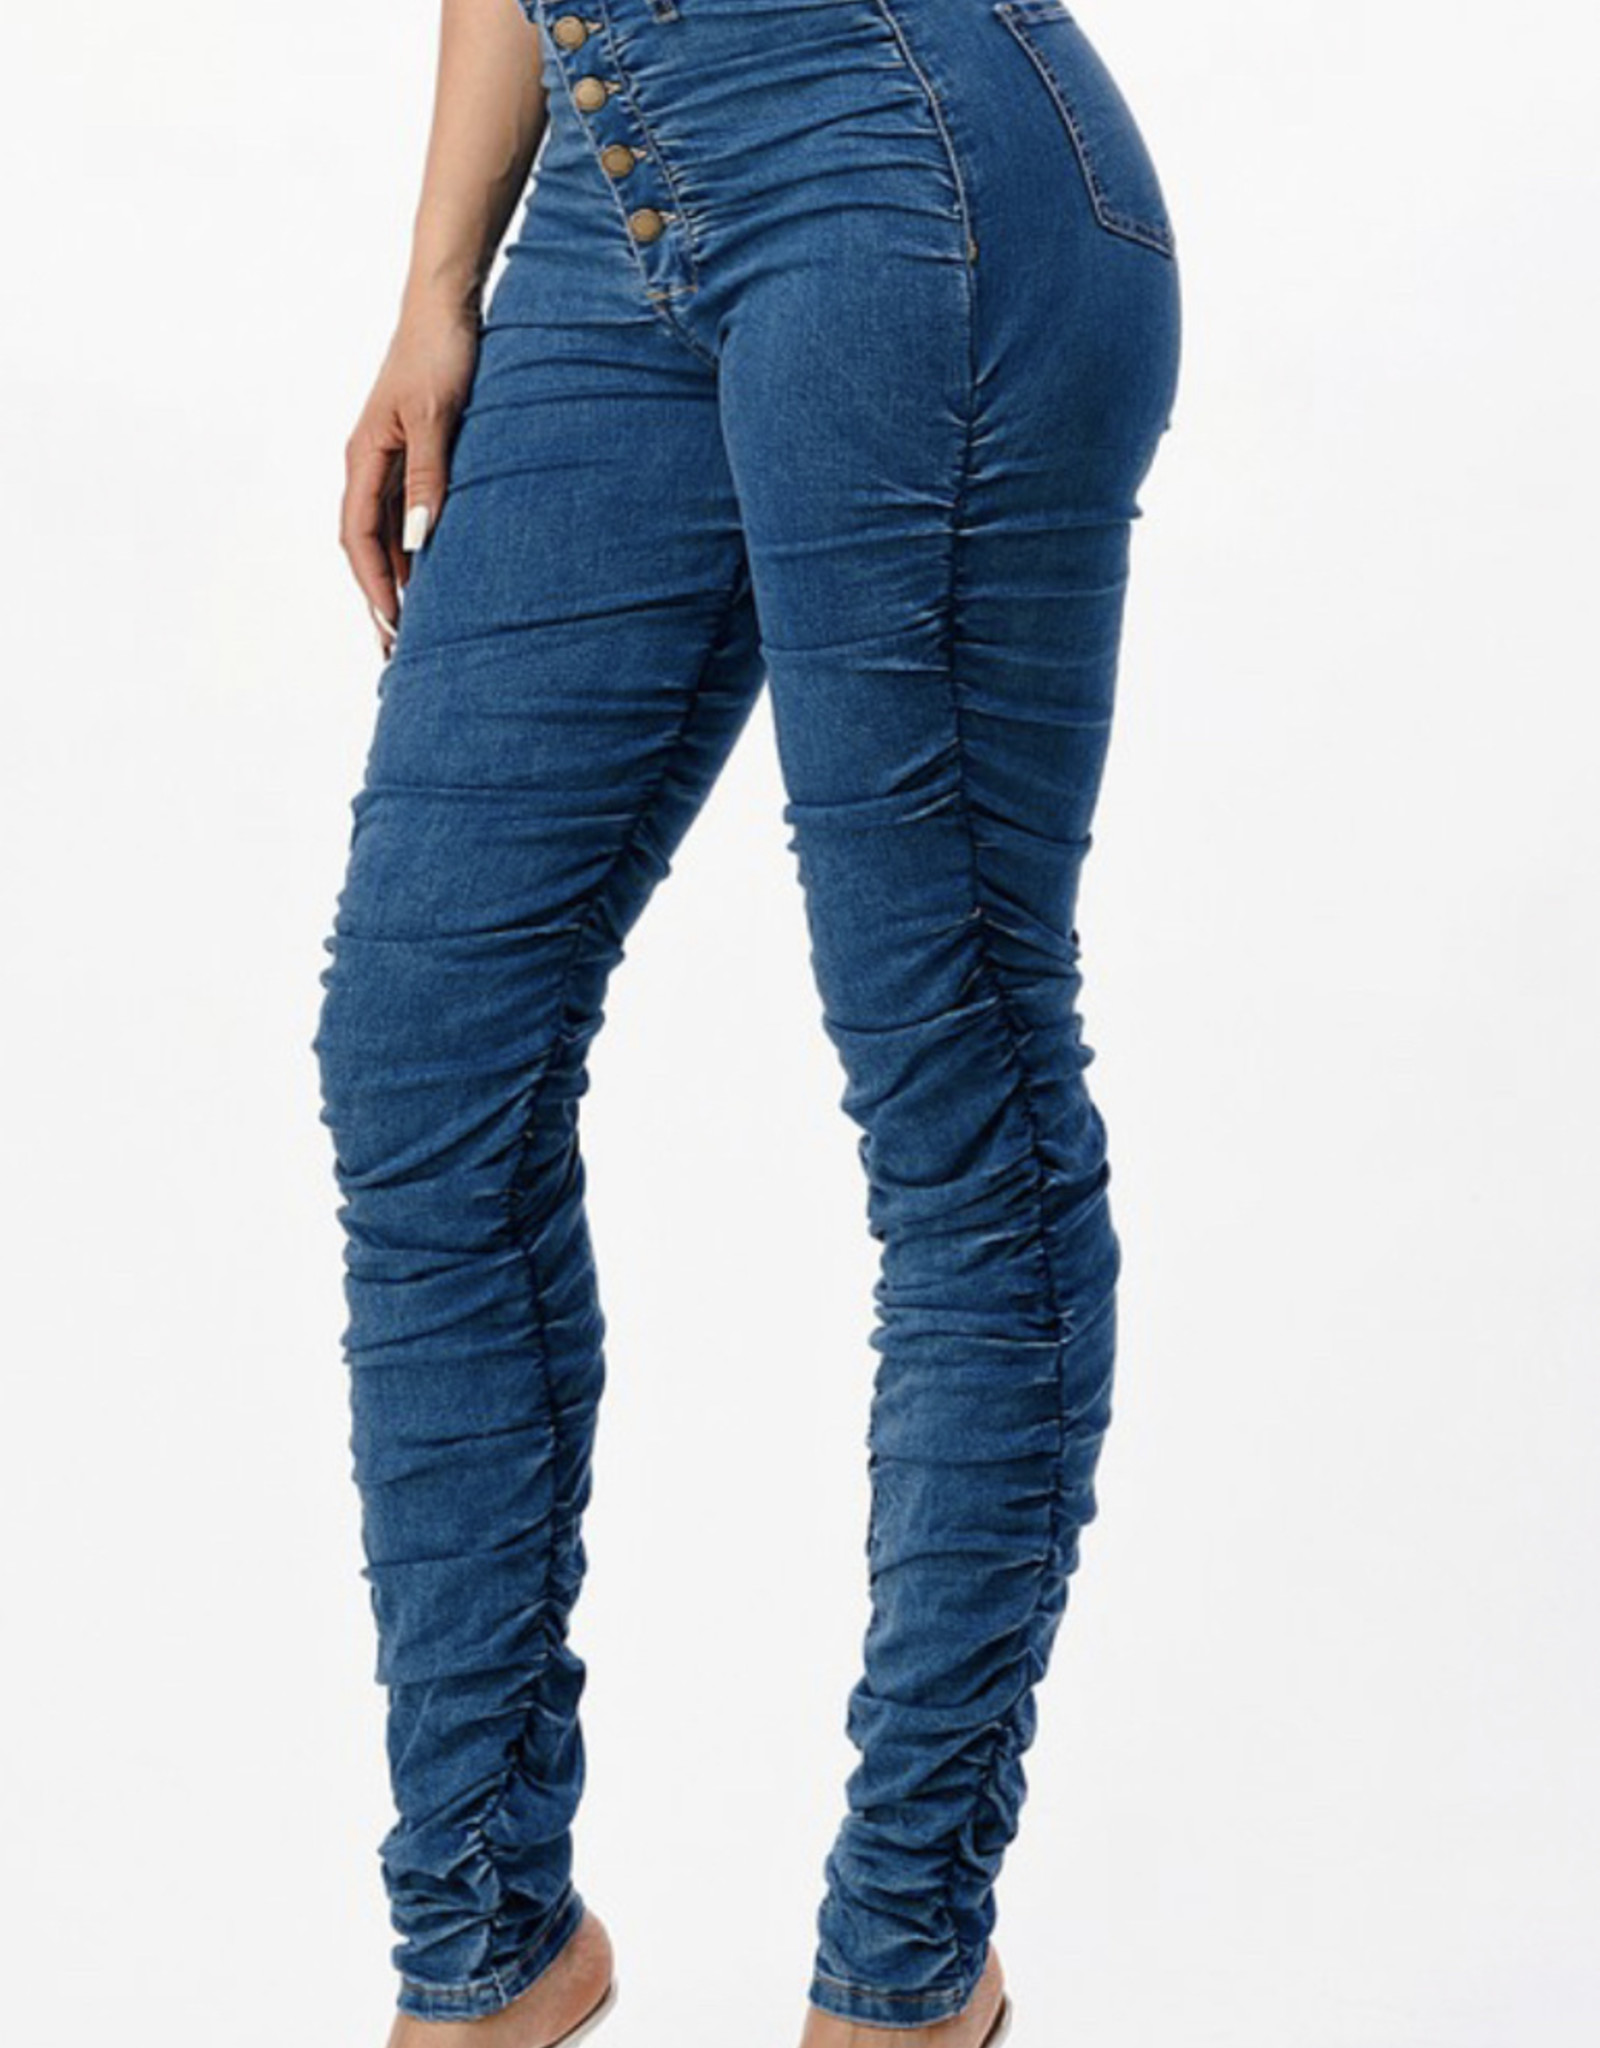 Ruched & Ready Denim Jeans